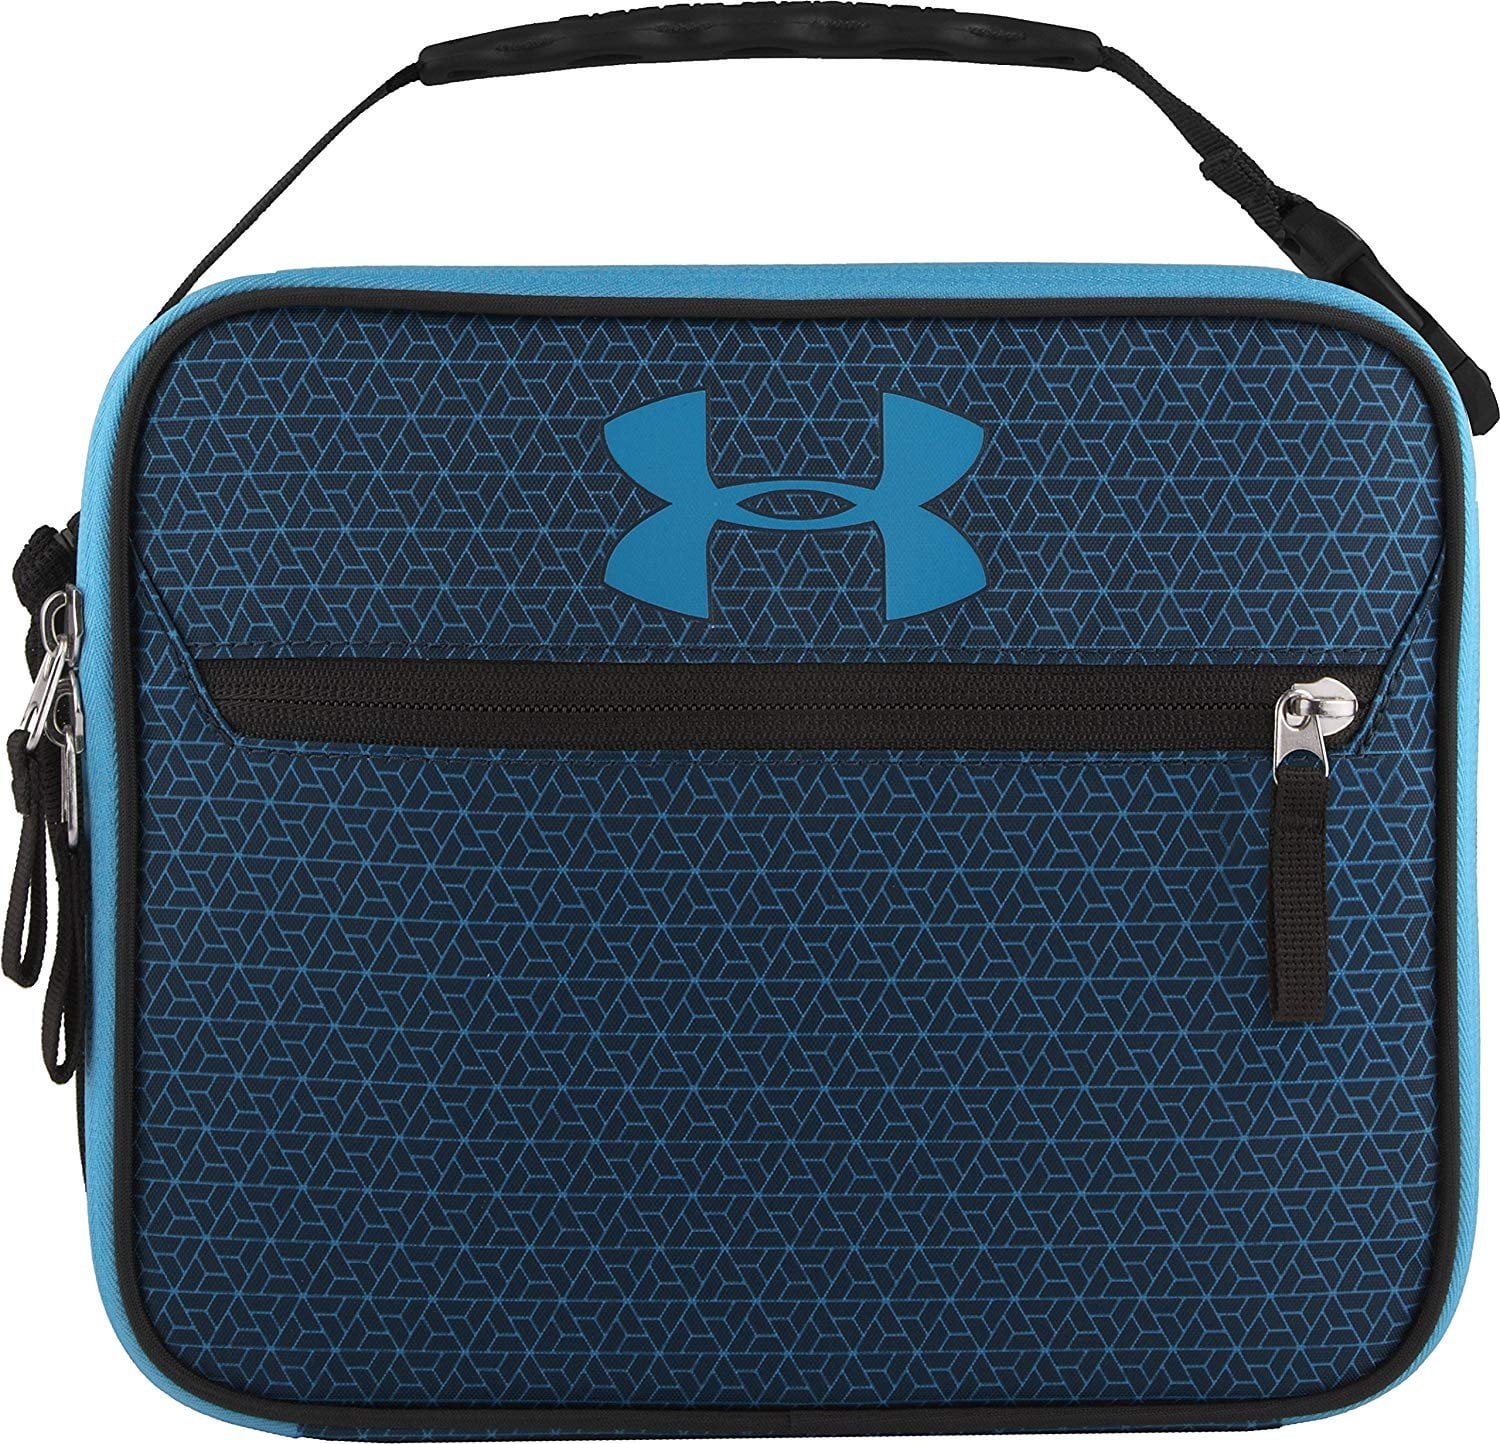 Under Armour Lunch Box Graphite 